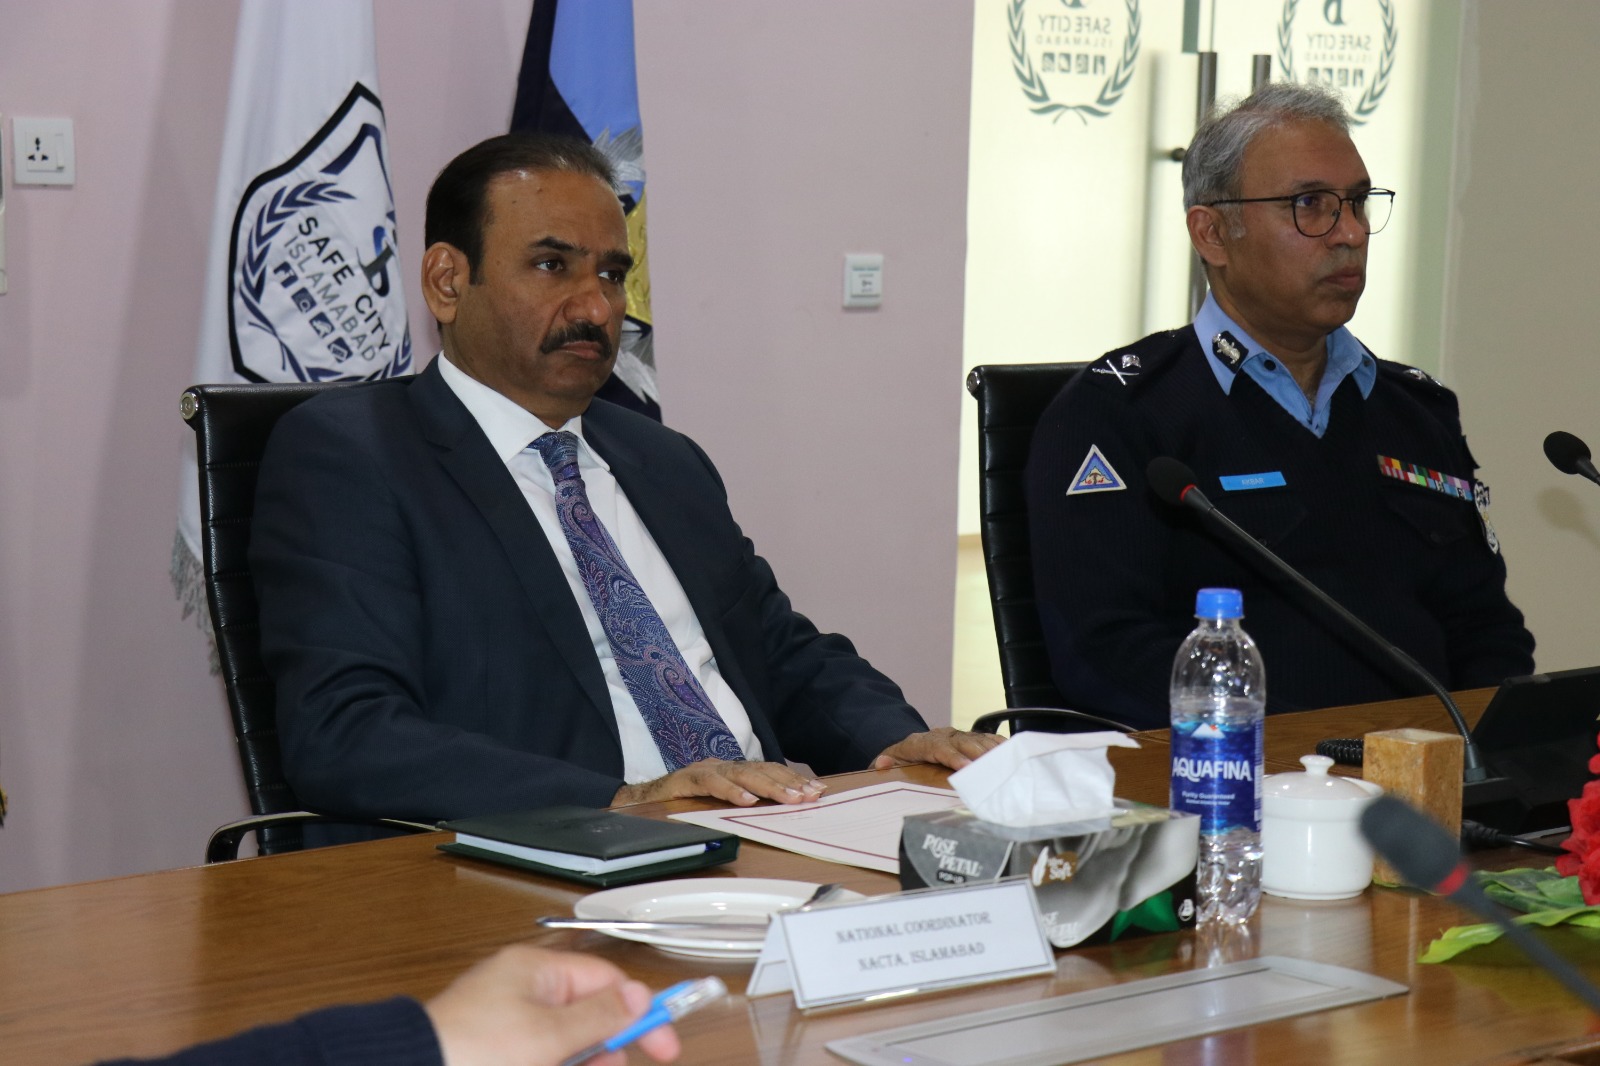 Violent Extremism Prevention Unit inaugurated at Safe City Islamabad.